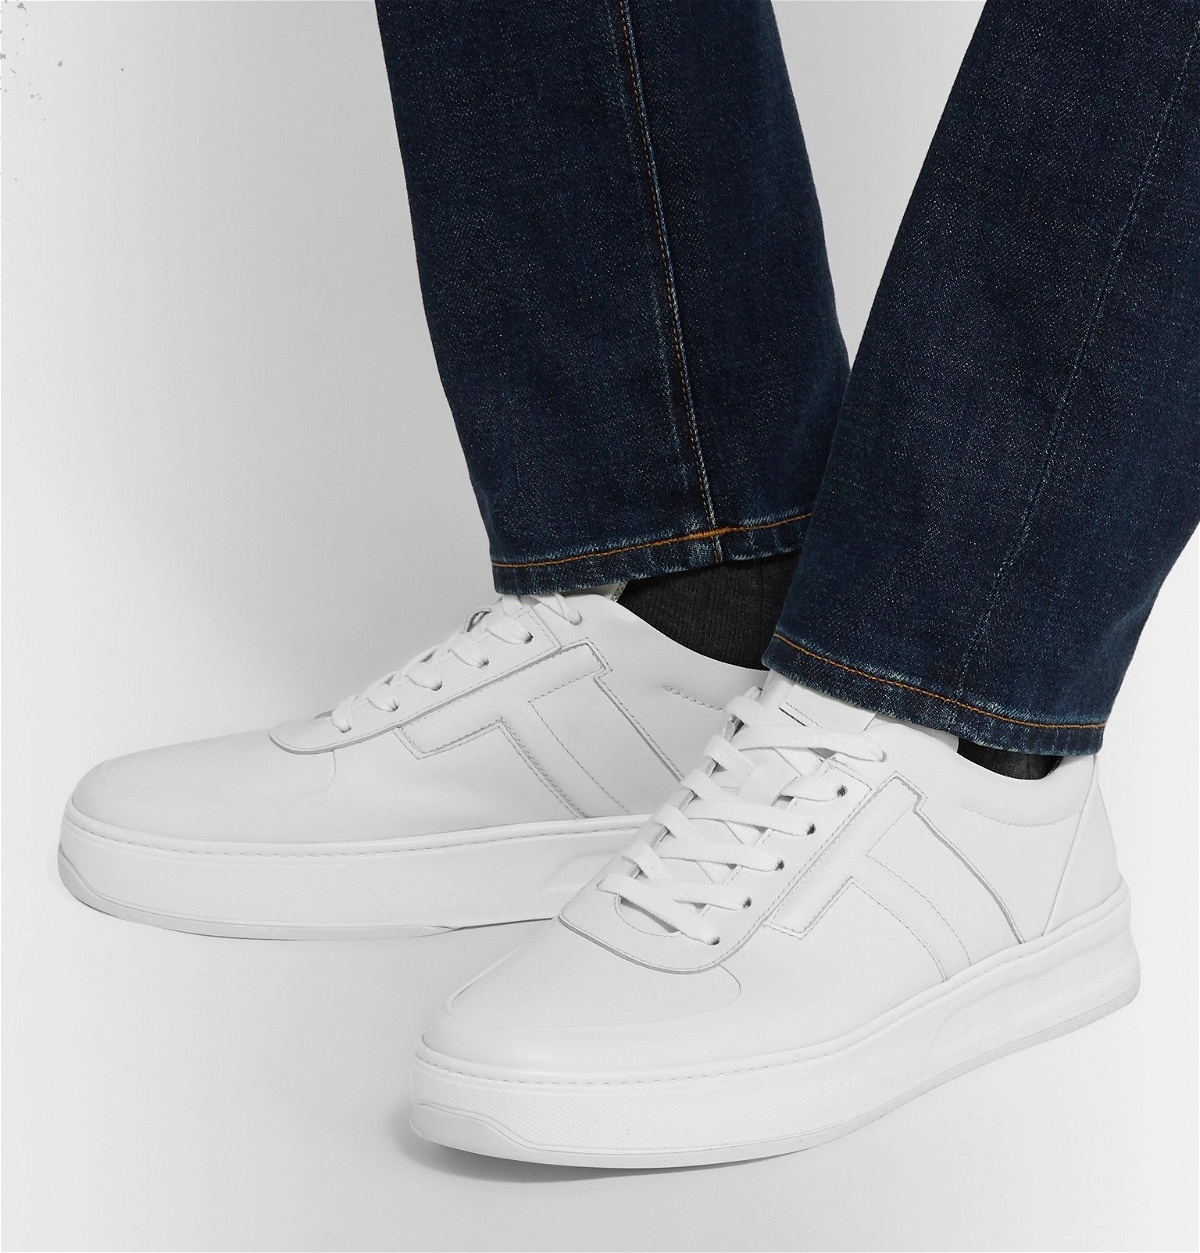 Discover more than 127 tods white sneakers latest